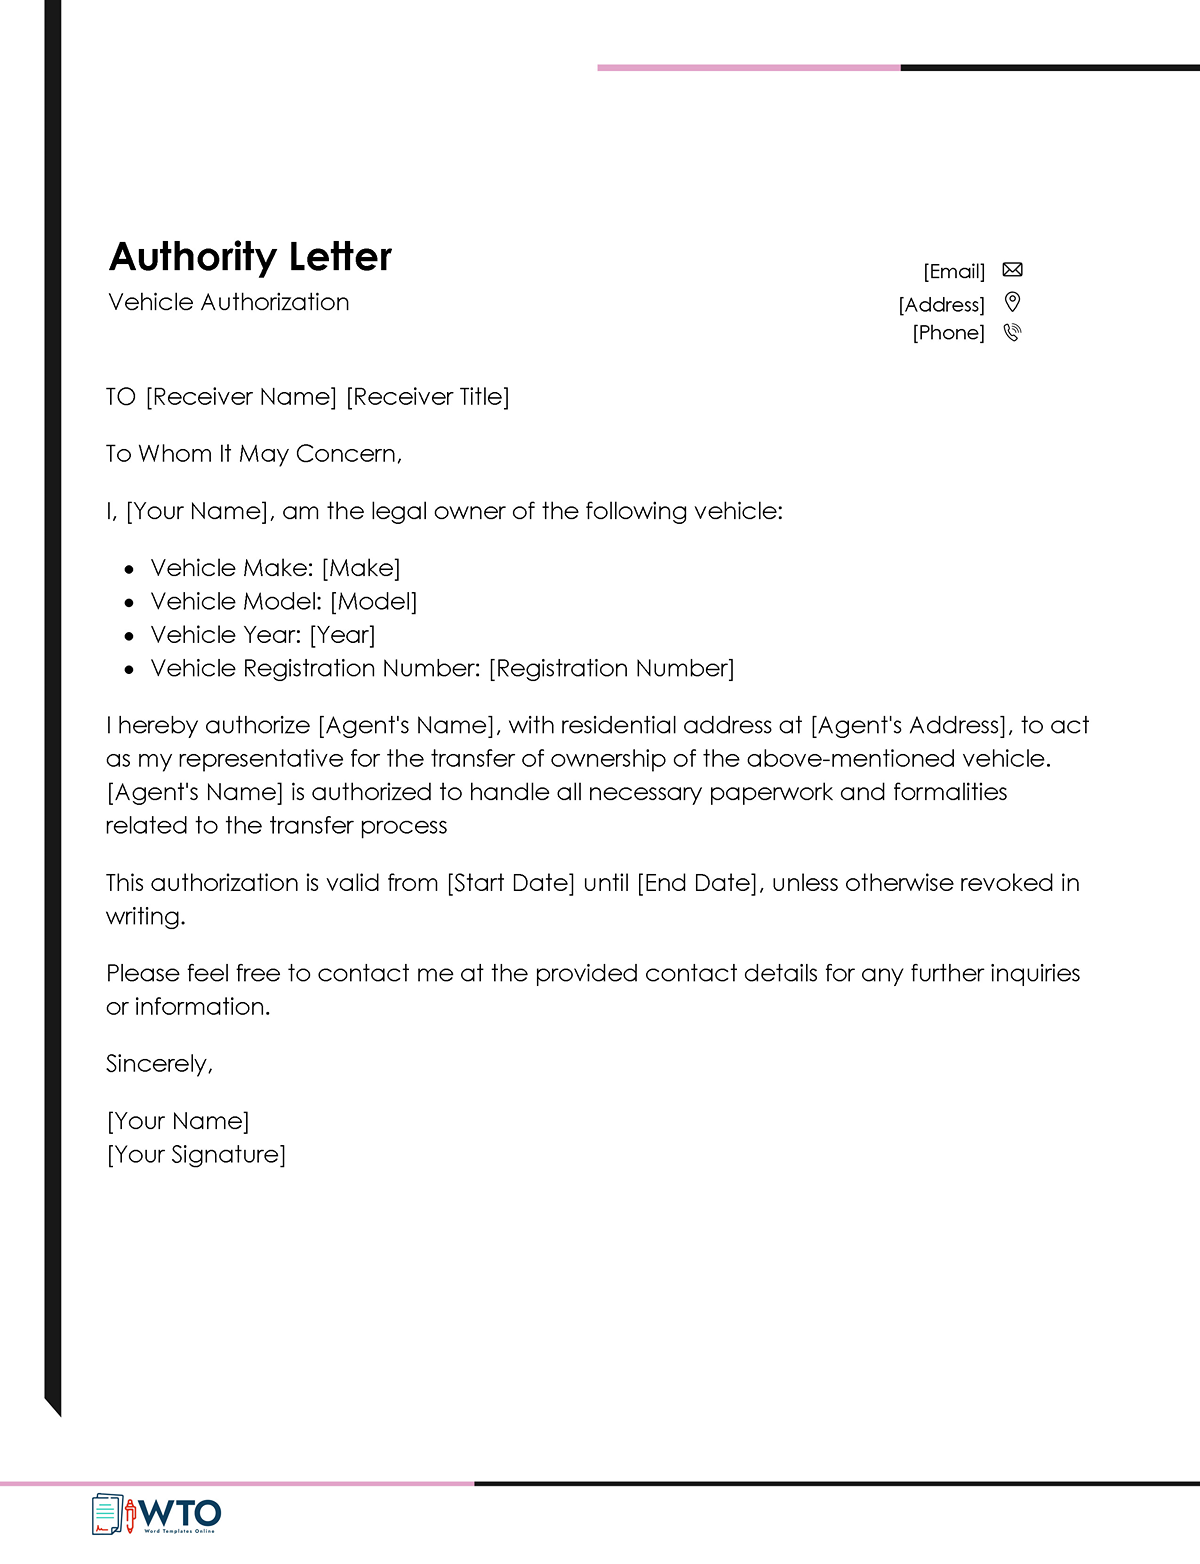 Vehicle Authorization Letter Template-Free Download